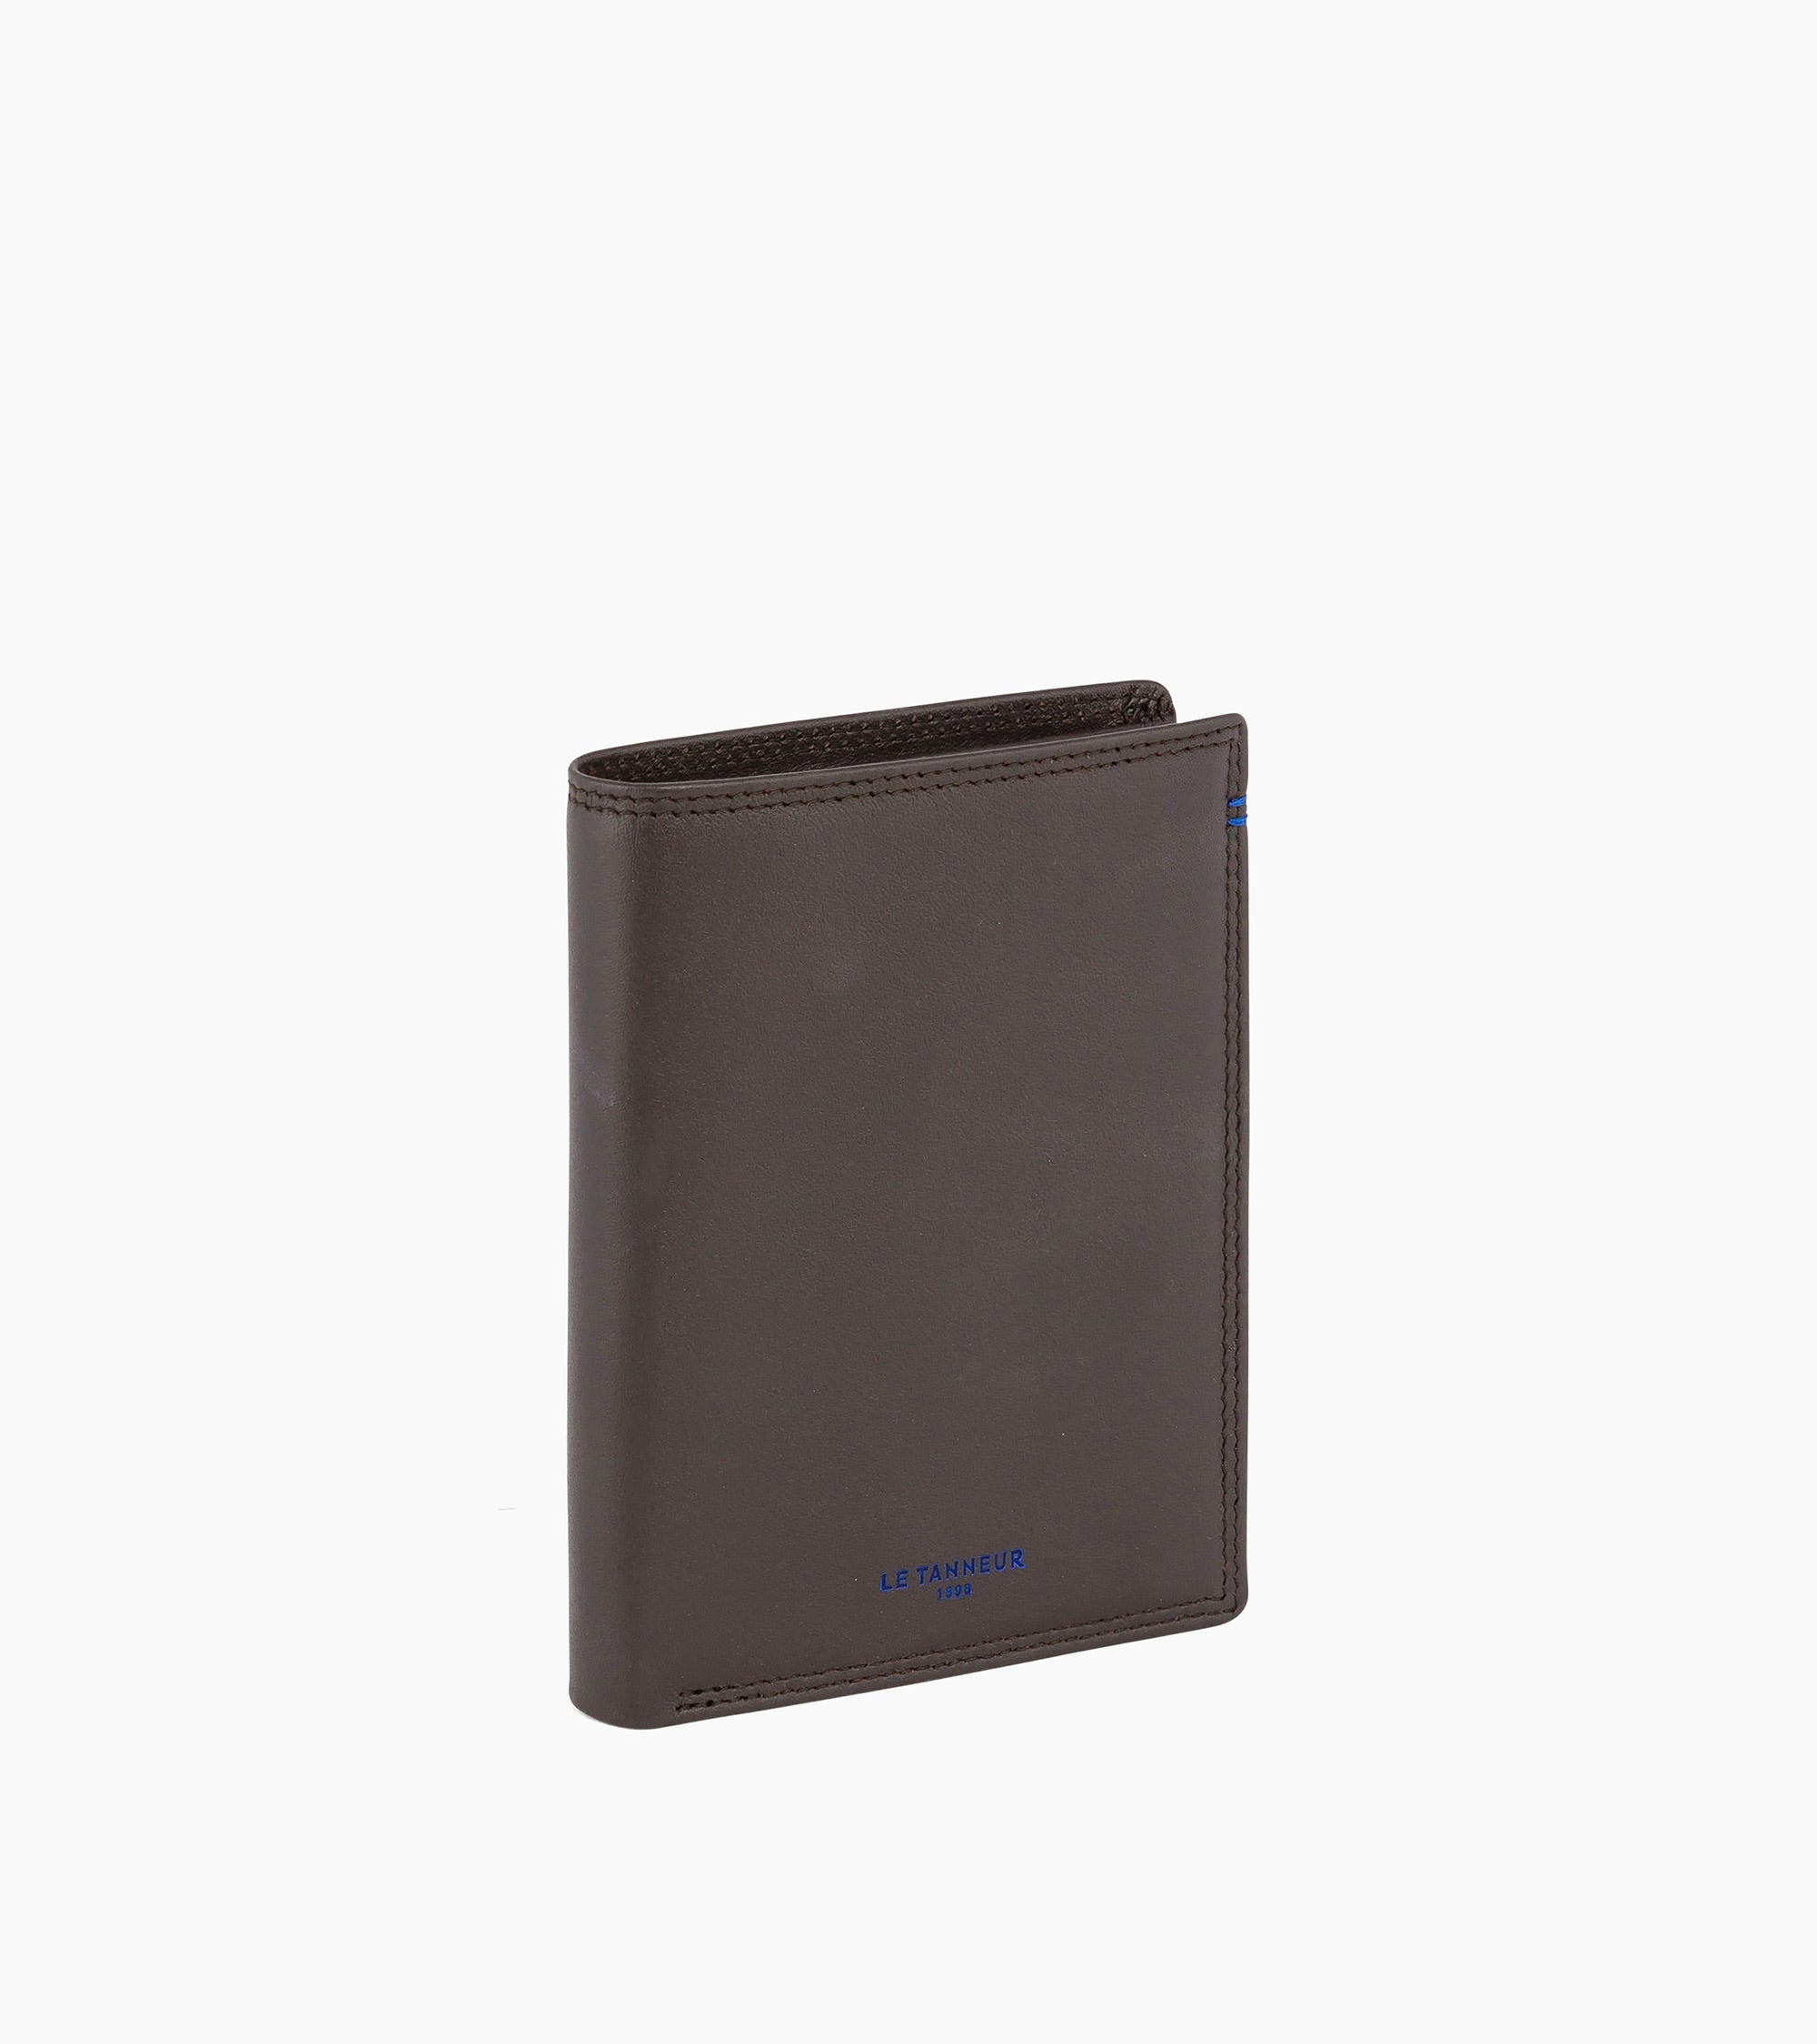 Small Martin smooth leather wallet